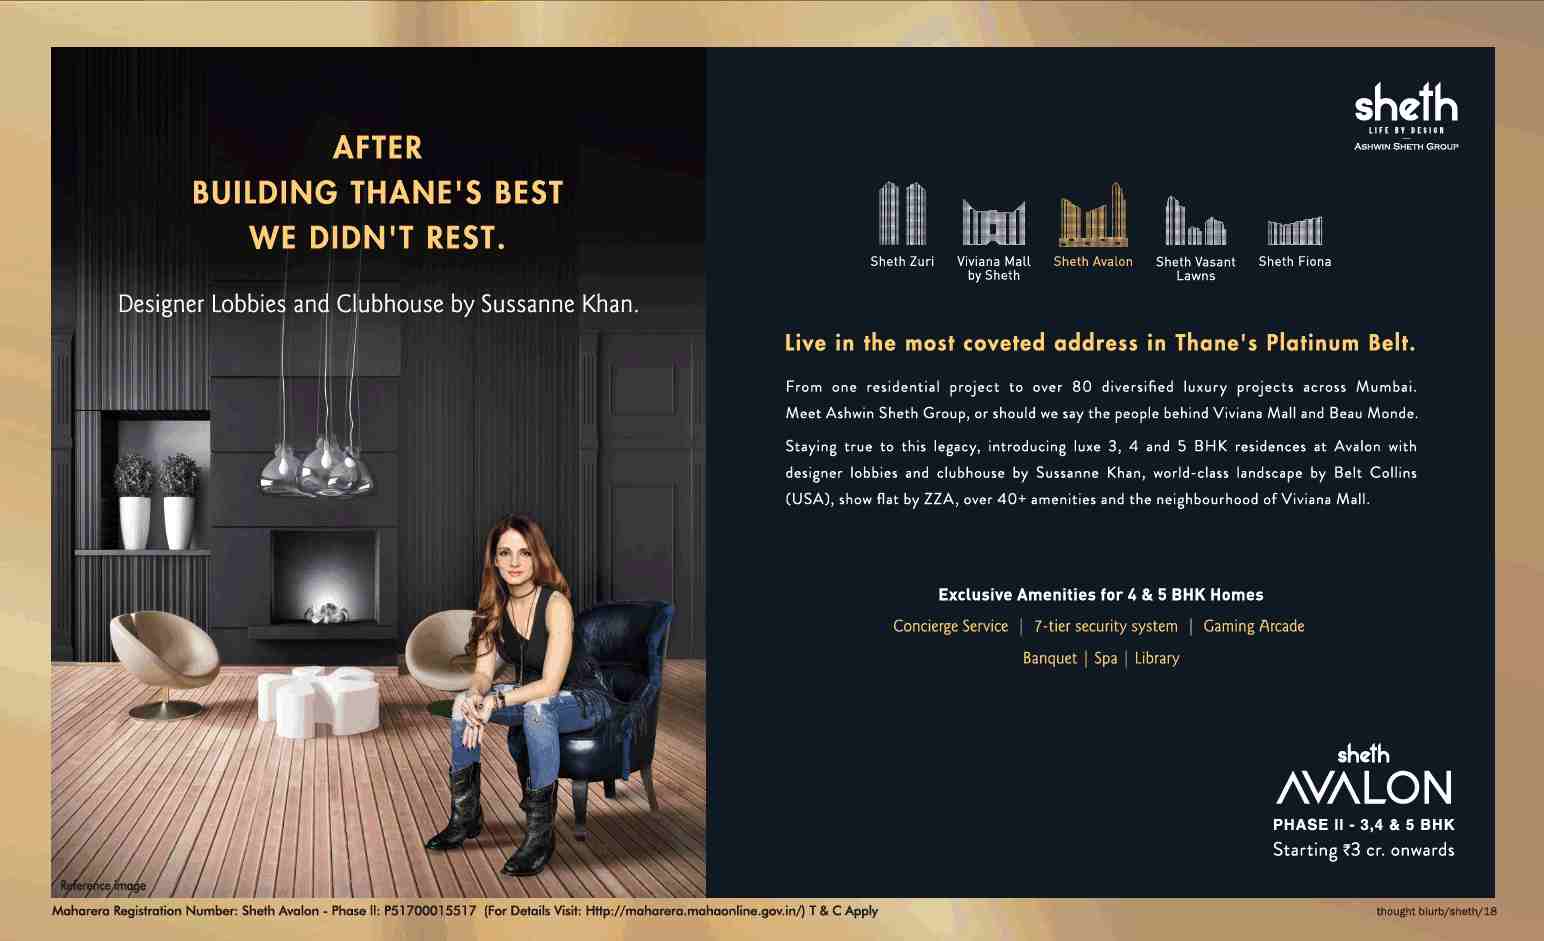 Live at Sheth Avalon where lobbies & clubhouse is designed by Sussanne Khan Update